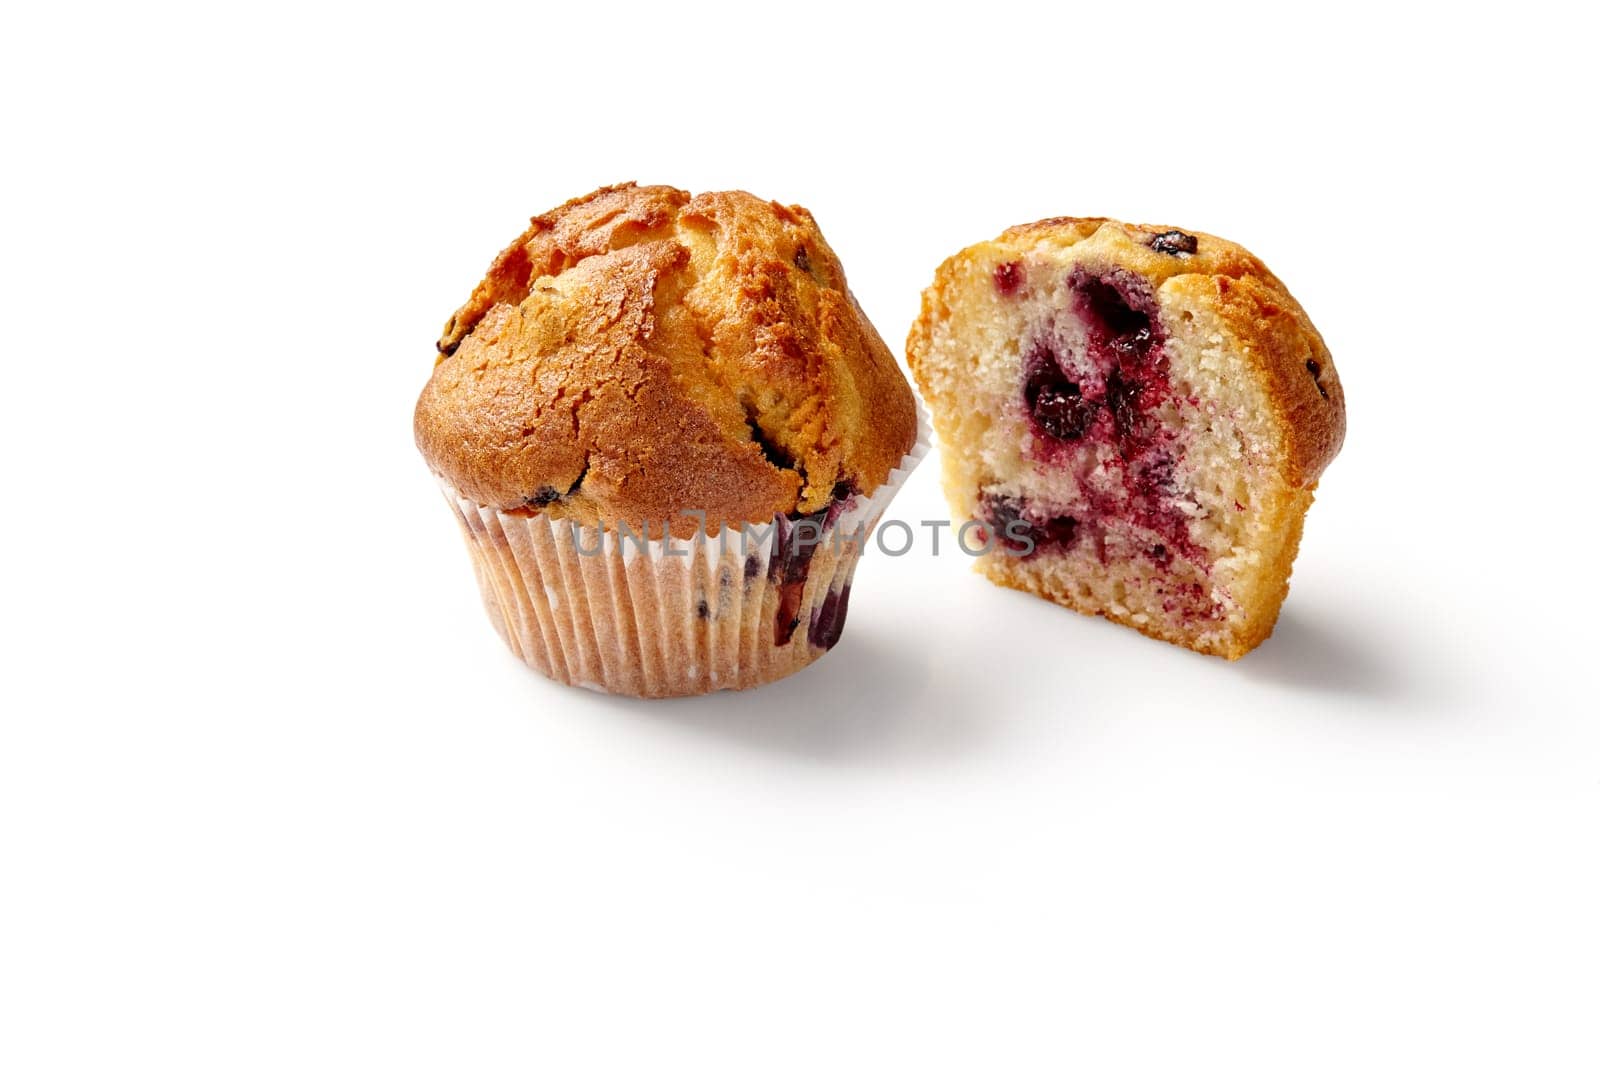 Appetizing whole and sliced fluffy vanilla muffins with ripe currant filling in paper wrapper on white background. Popular baked desserts